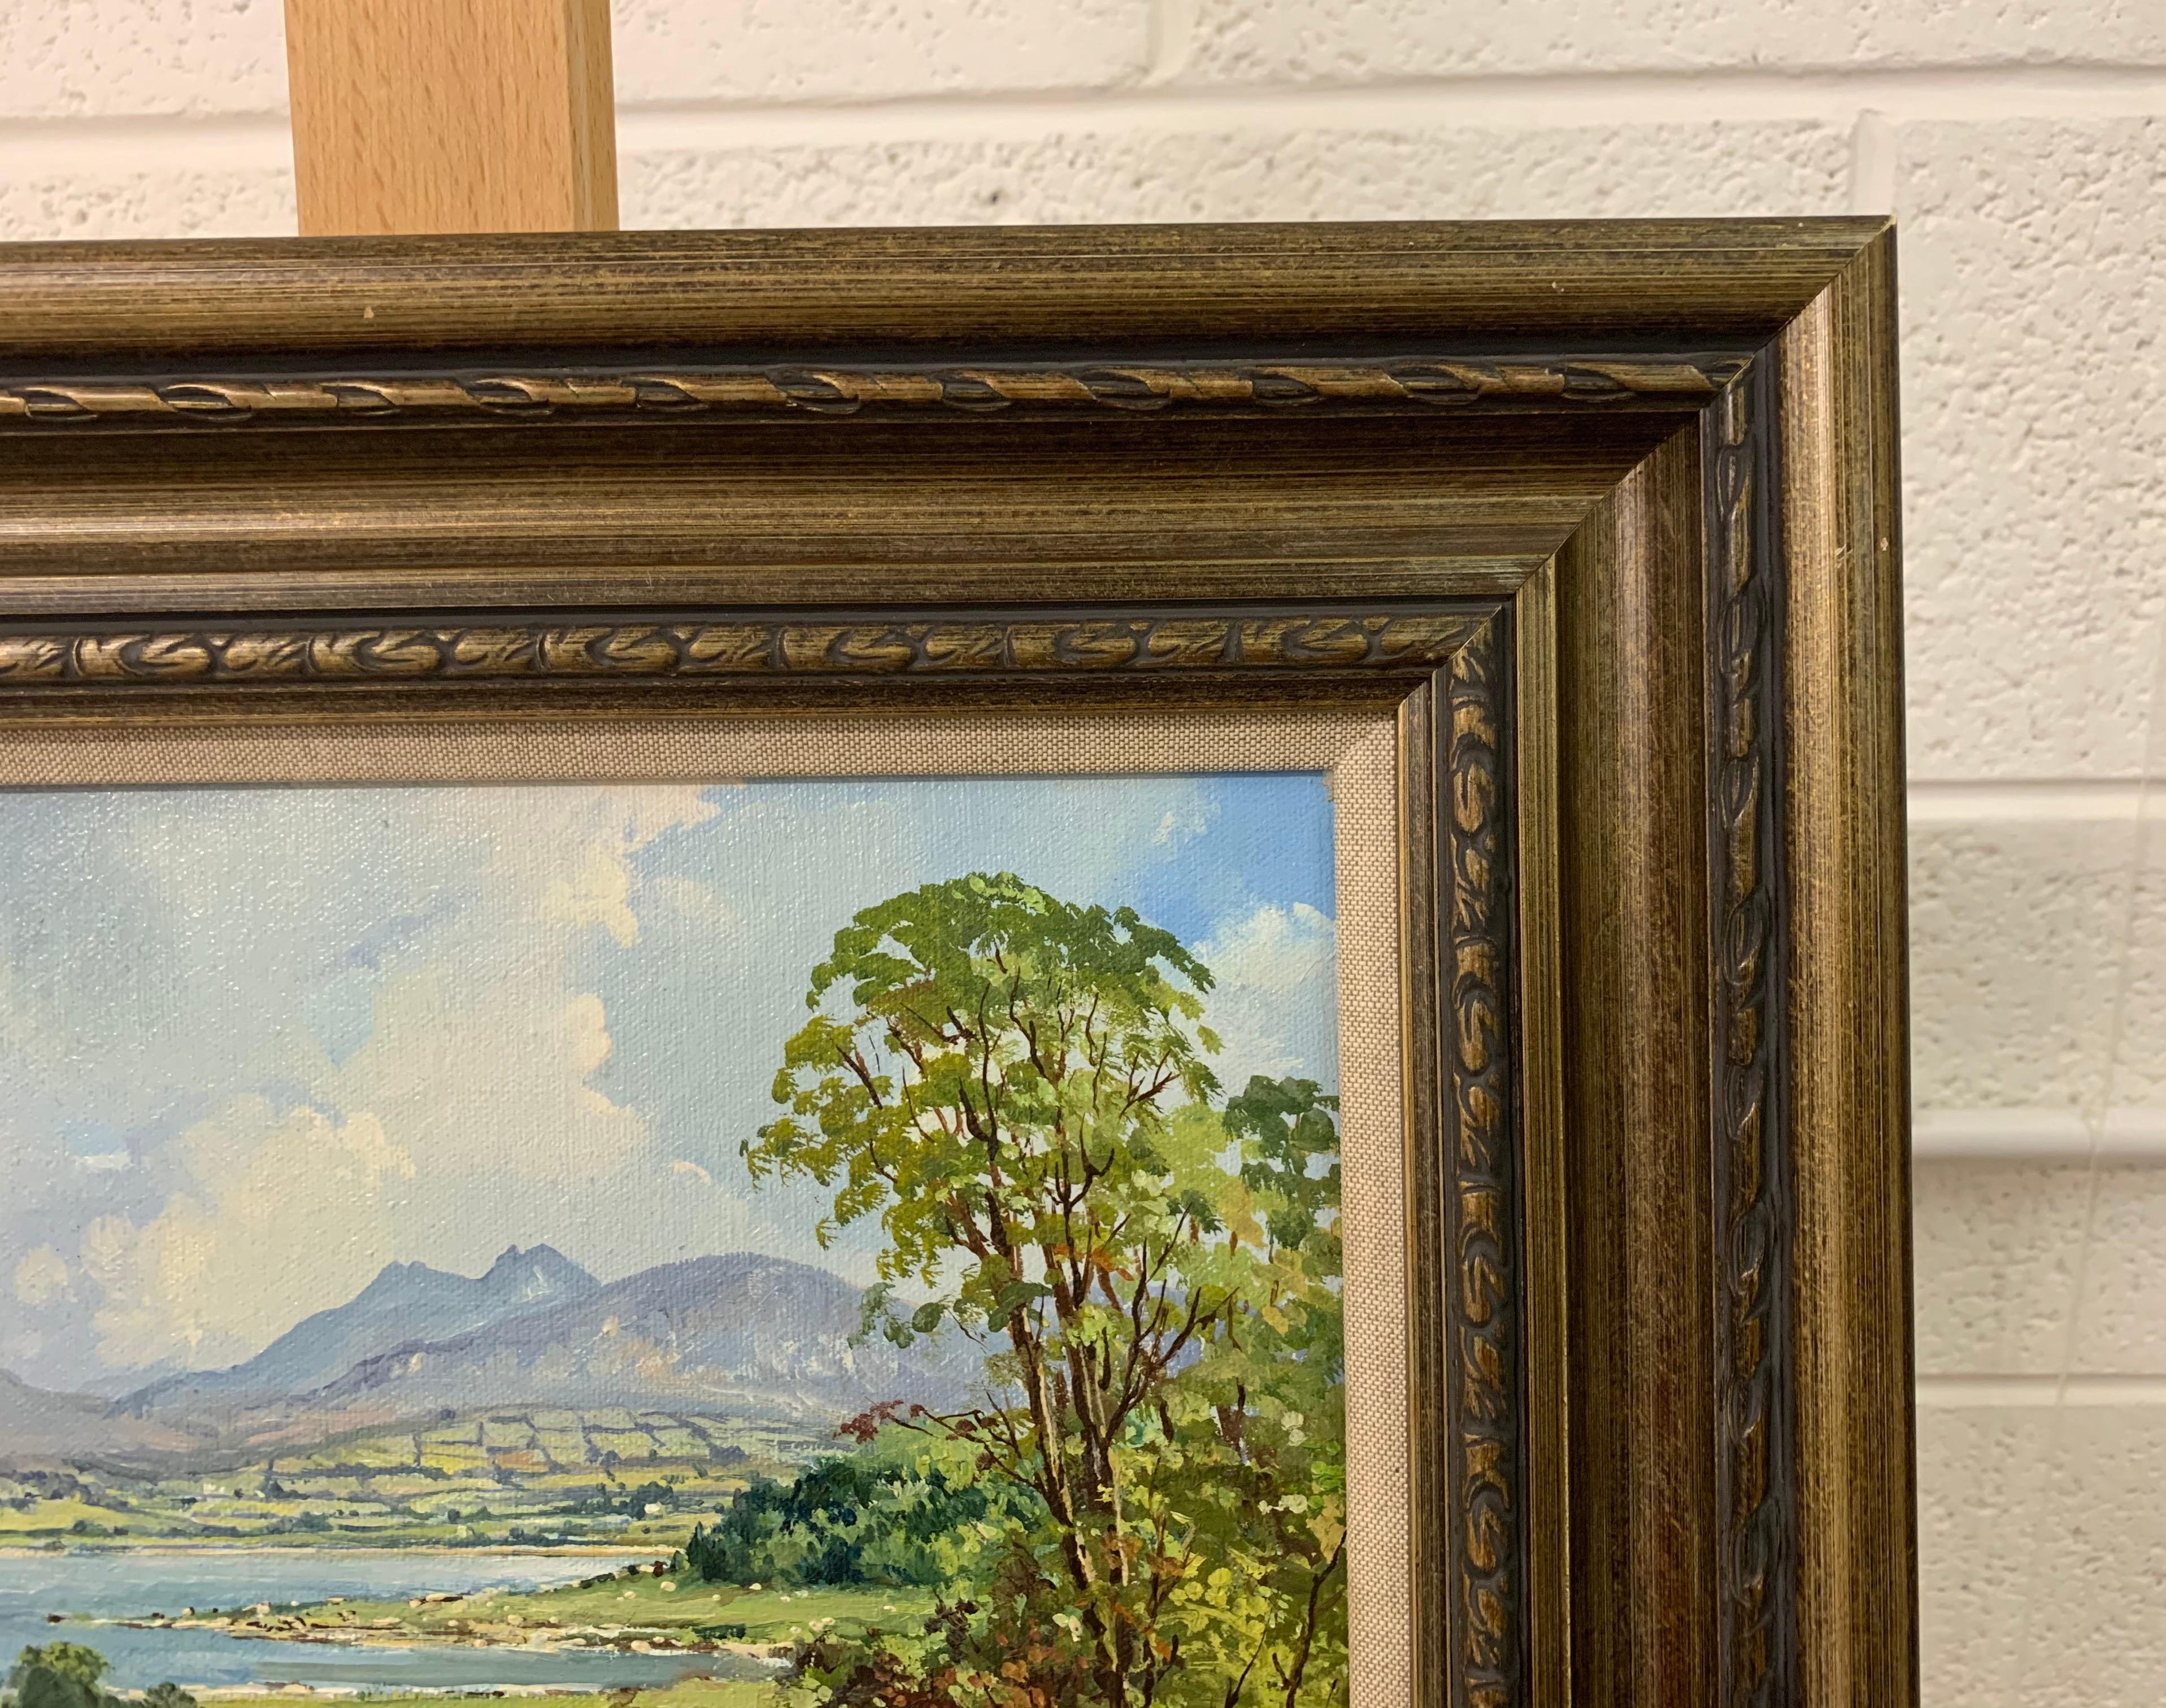 Oil Painting of Lough Island in County Down Ireland by Modern Irish Artist Denis Thornton (1937-1999)

Art measures 12 x 10 inches
Frame measures 18 x 16 inches 
